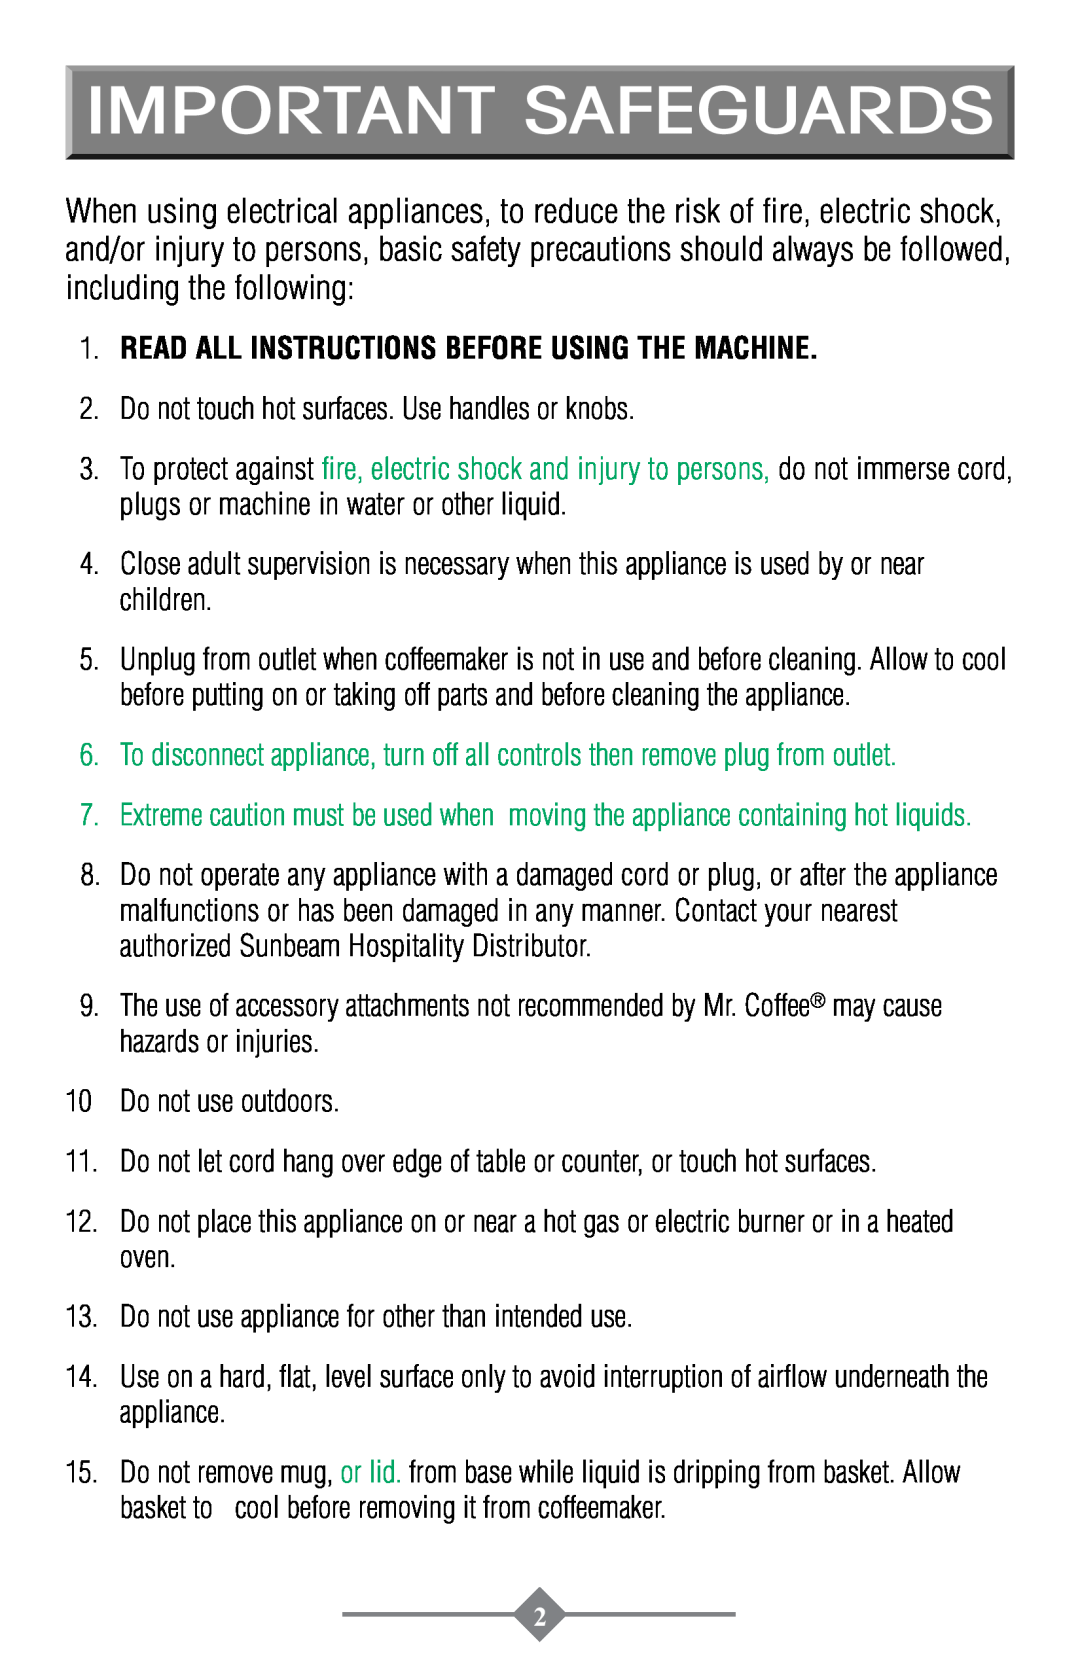 Mr. Coffee PTC13-100 instruction manual Read all instructions before using the machine, Important Safeguards 